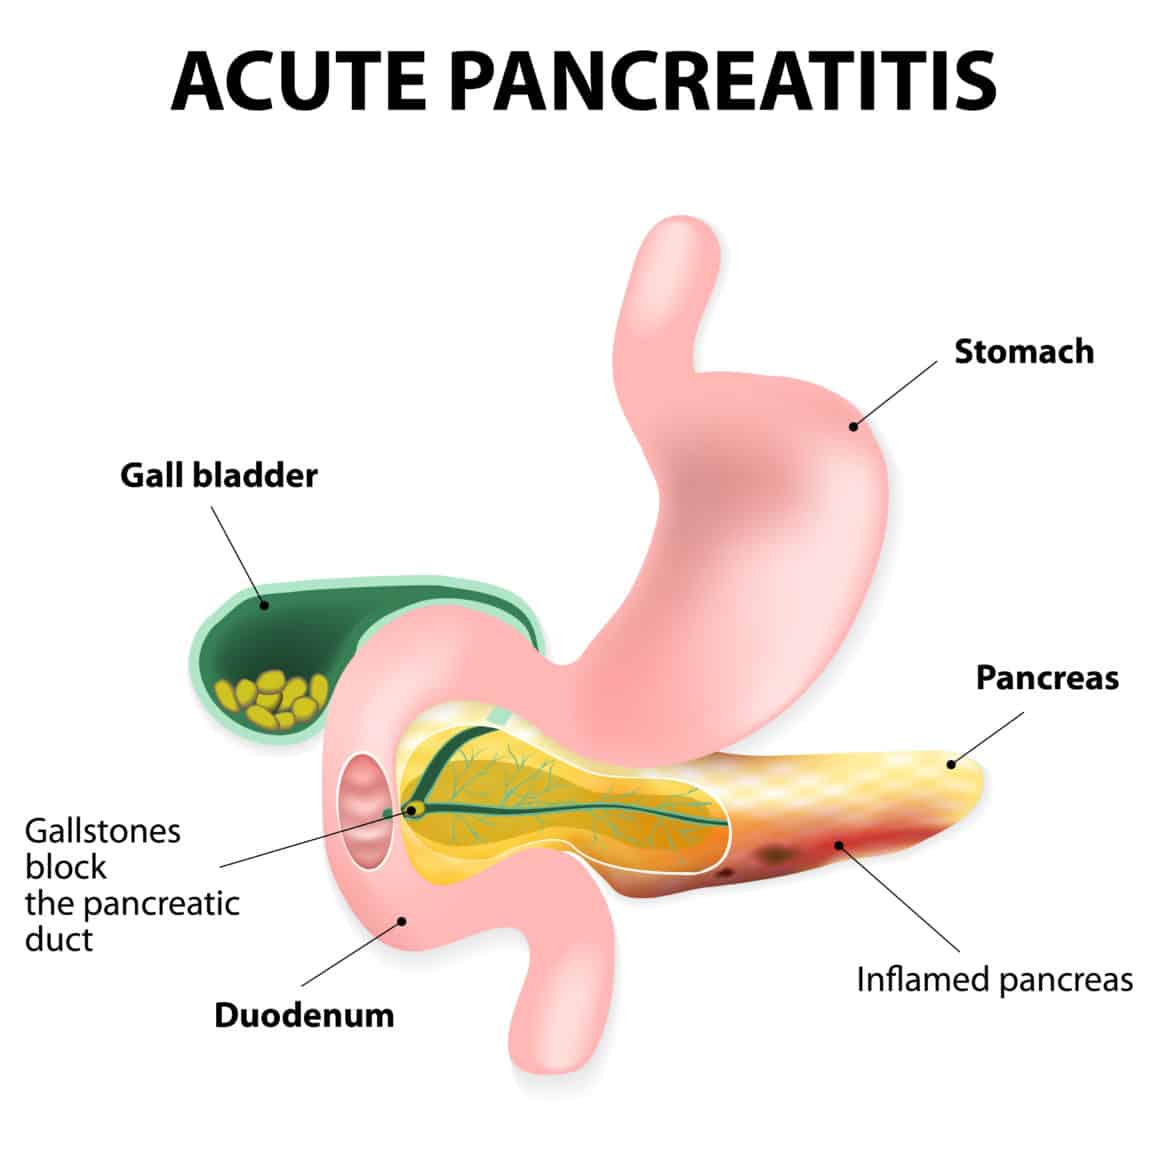 Acute pancreatitis is an inflammation of the pancreas. Gallstones block the flow of pancreatic juices into the duodenum. Digestive enzymes become active in pancreas, where they destroy healthy tissue.